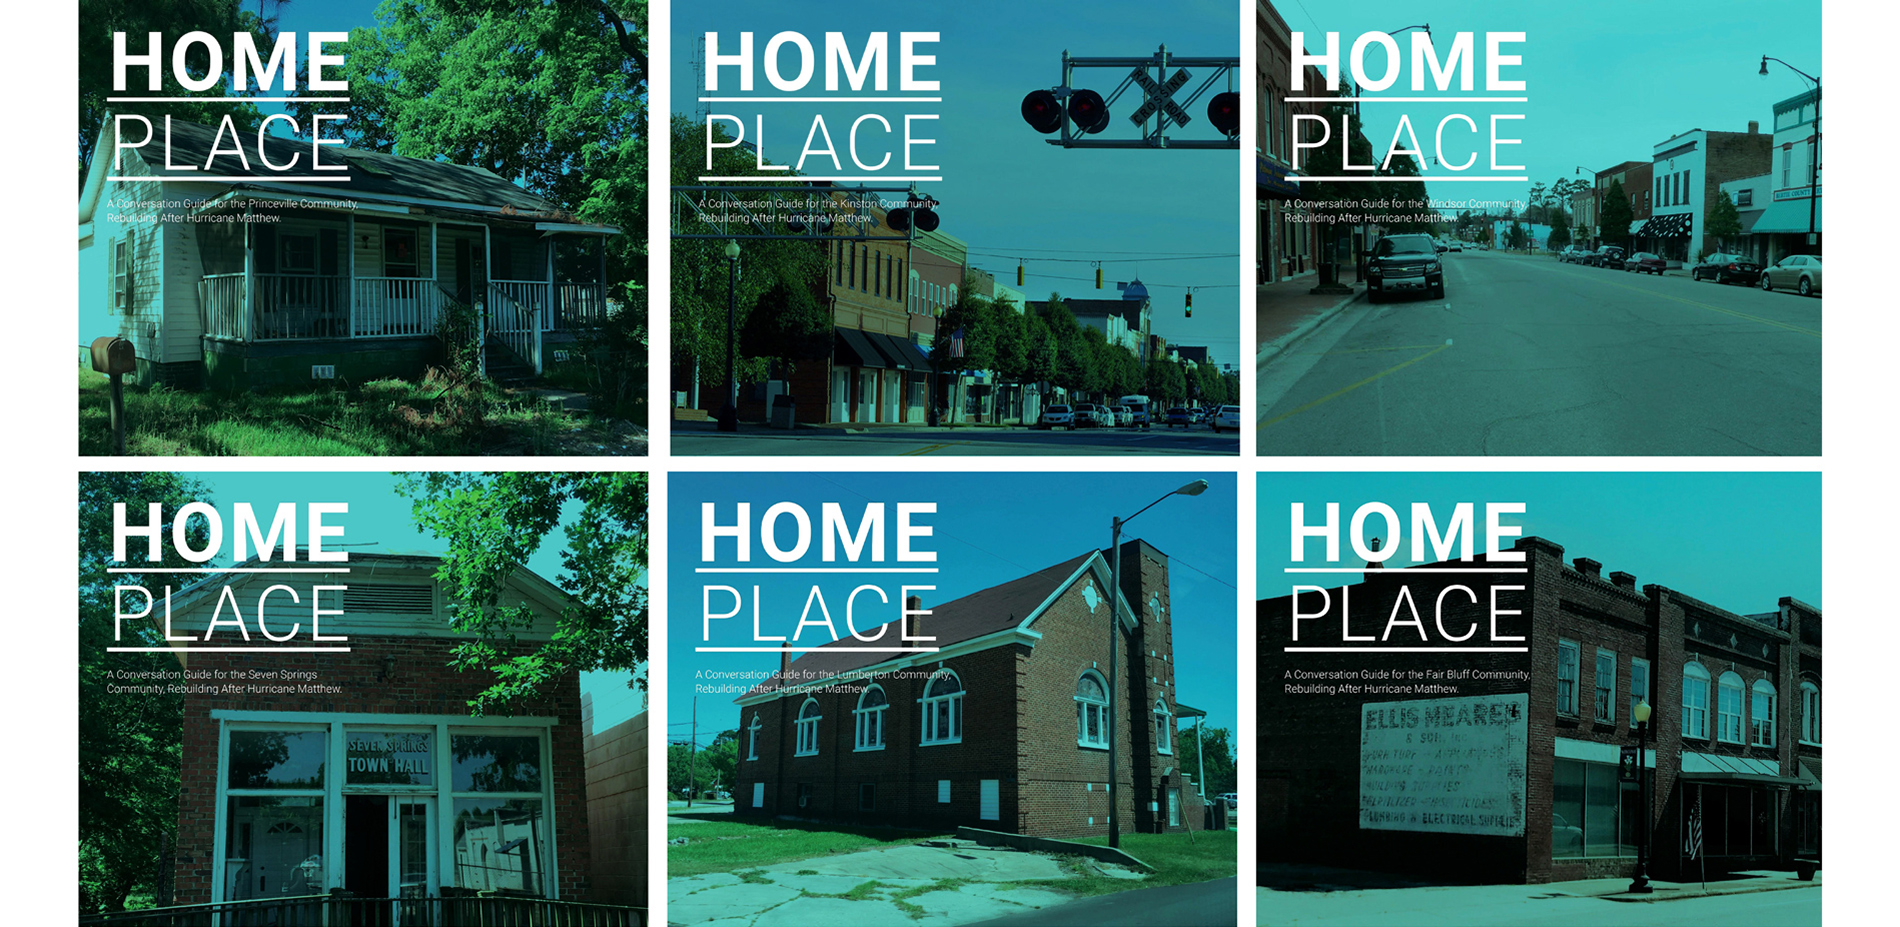 These guides were used by city leaders, regional planners, and residents to better understand options for the communities rebuilding after Hurricane M…